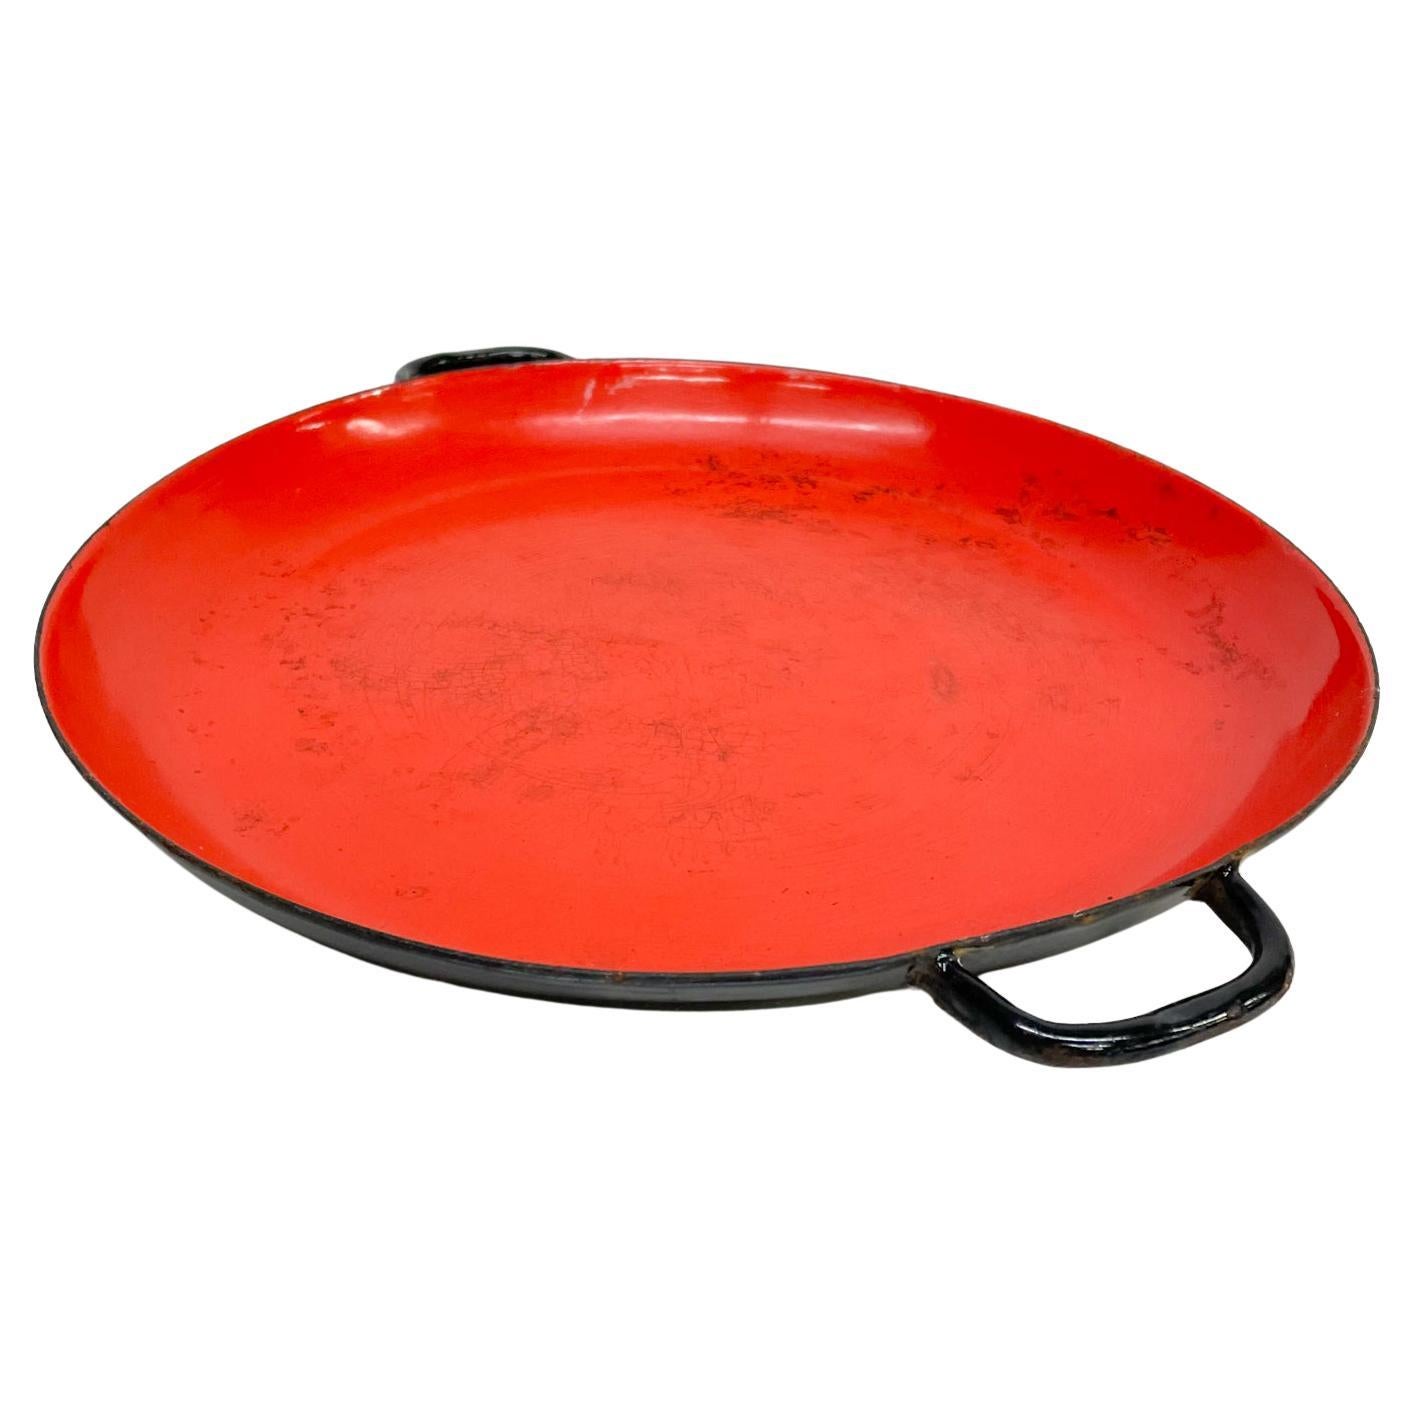 Red server plate
LANTONI Italian sizzling server plate in red enamel on cast iron Italy
Handle grip design
Measures: 12.63 x 10.5 diameter x 1.13 height inches
Maker stamp present. Sizzling Servers by LANTONI imported from Italy
Original